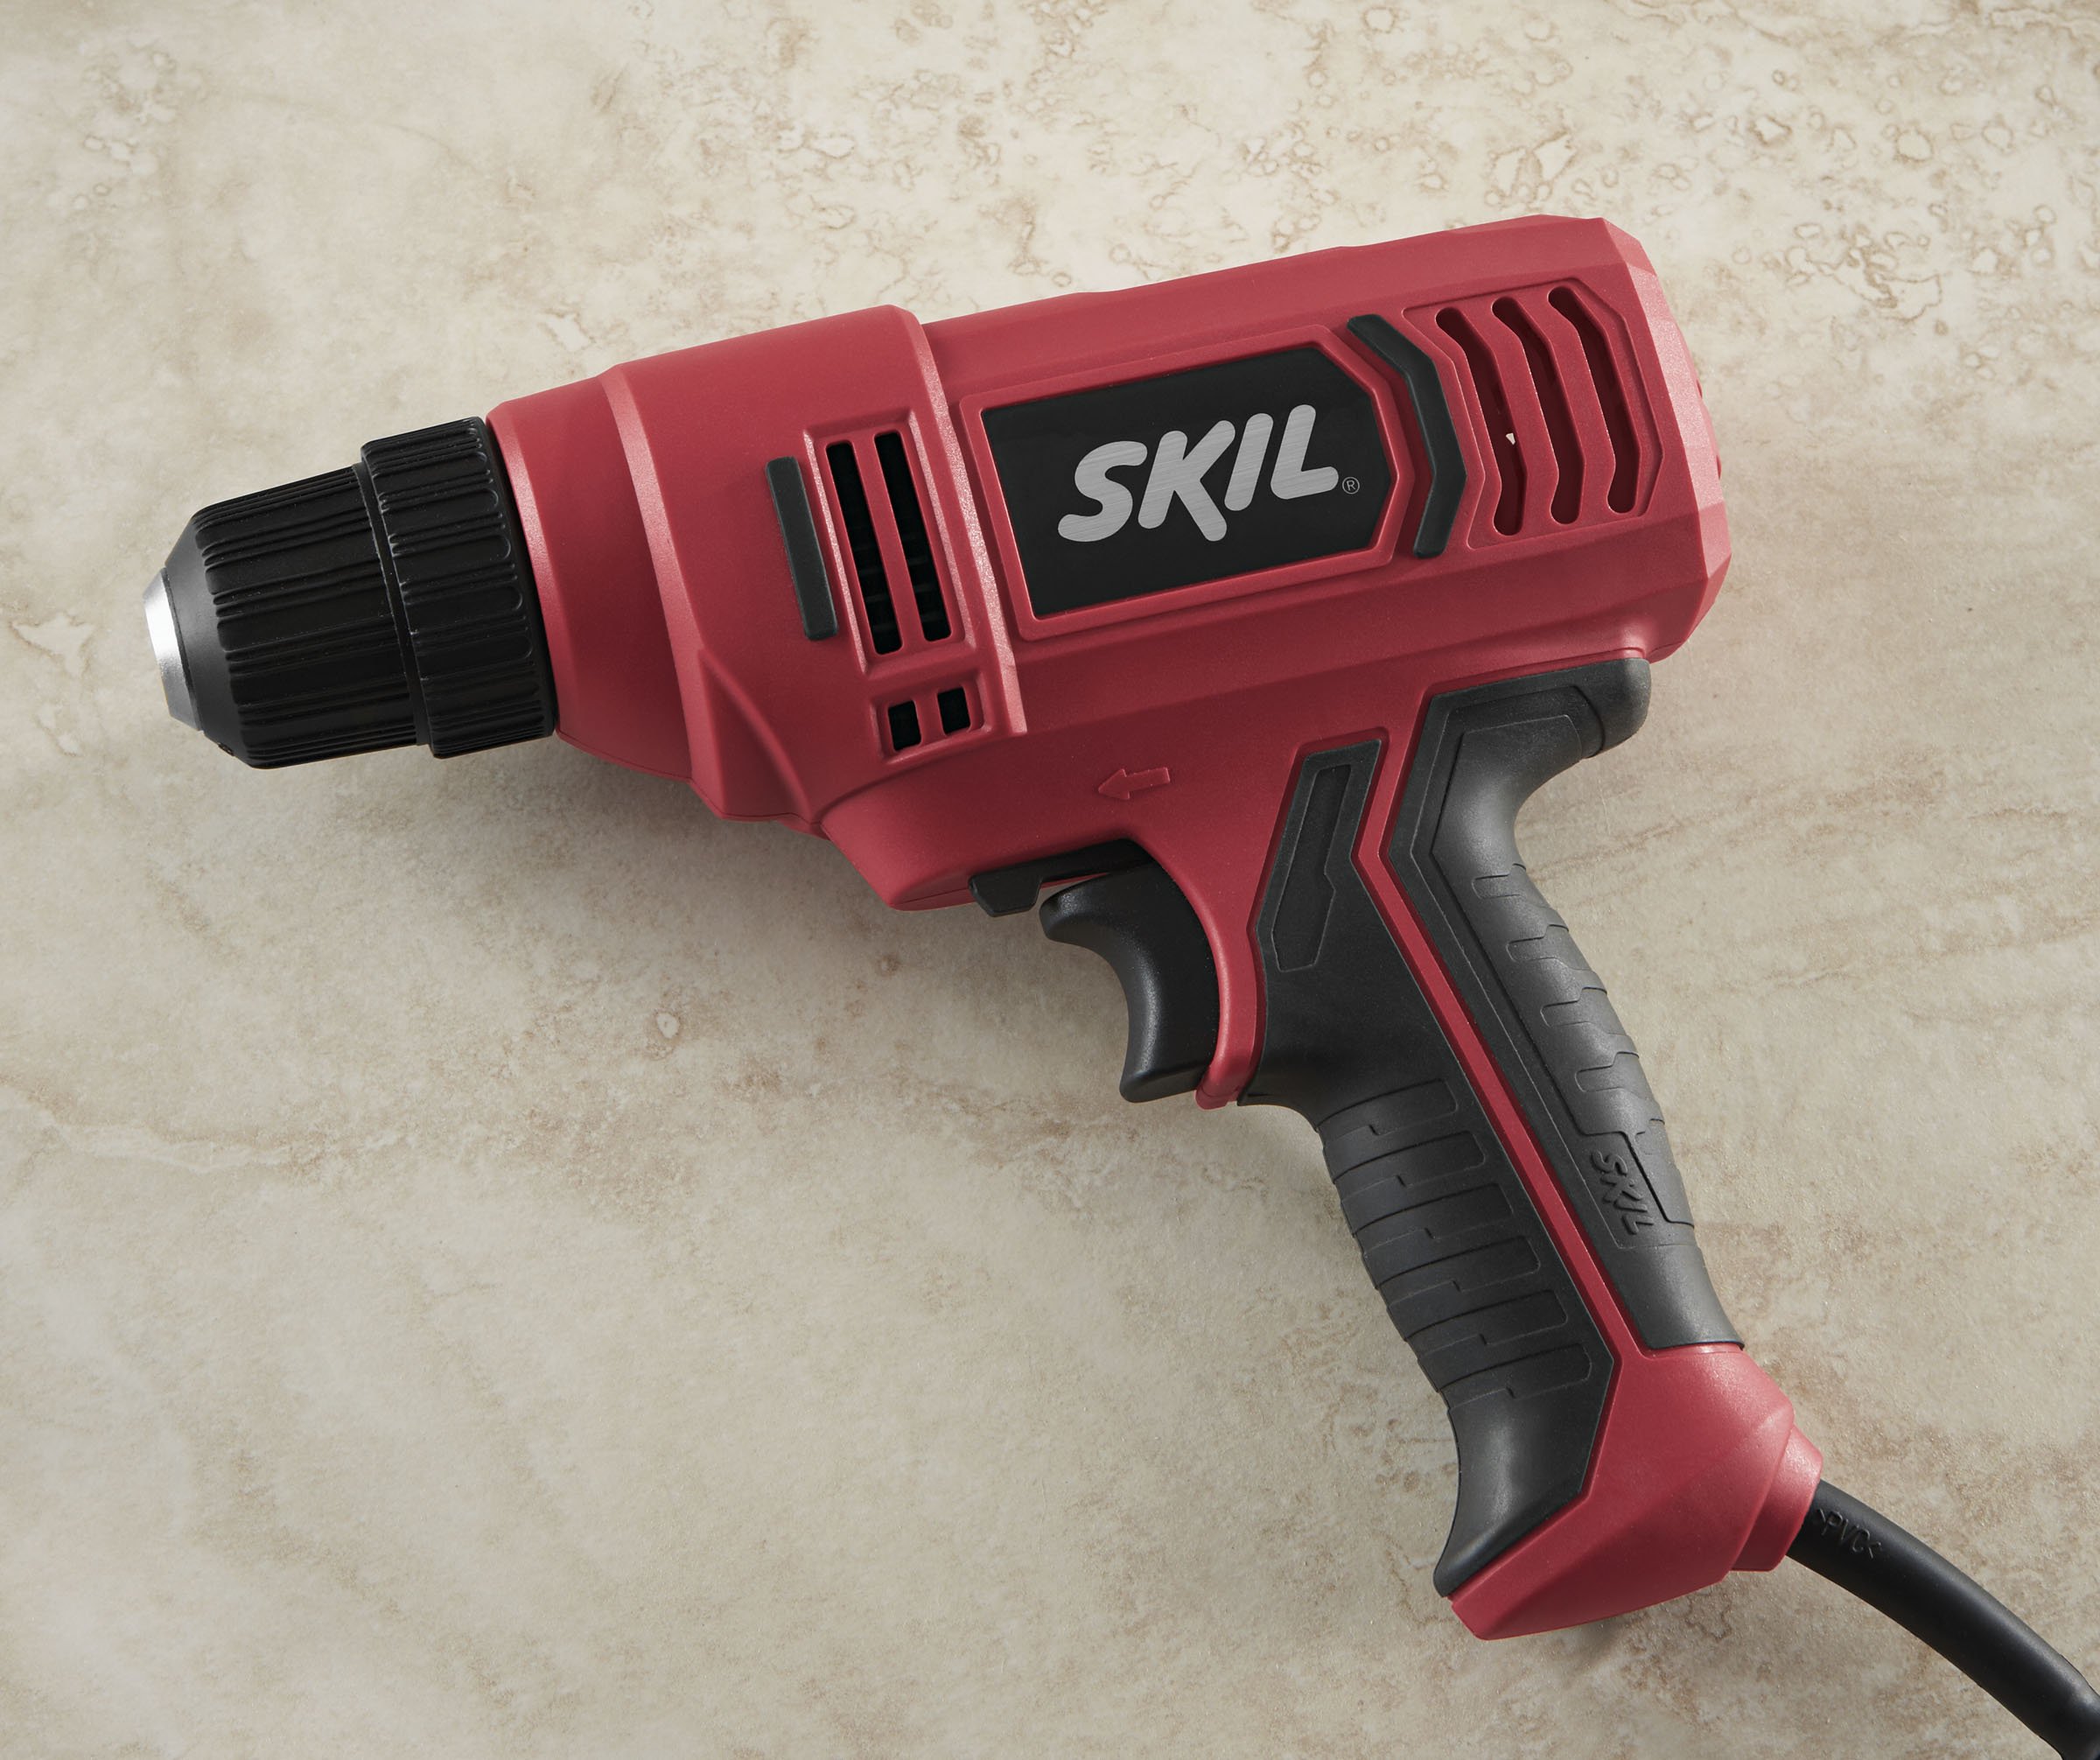 SKIL 6239-01 5.5 Amp Variable Speed Drill, 3/8